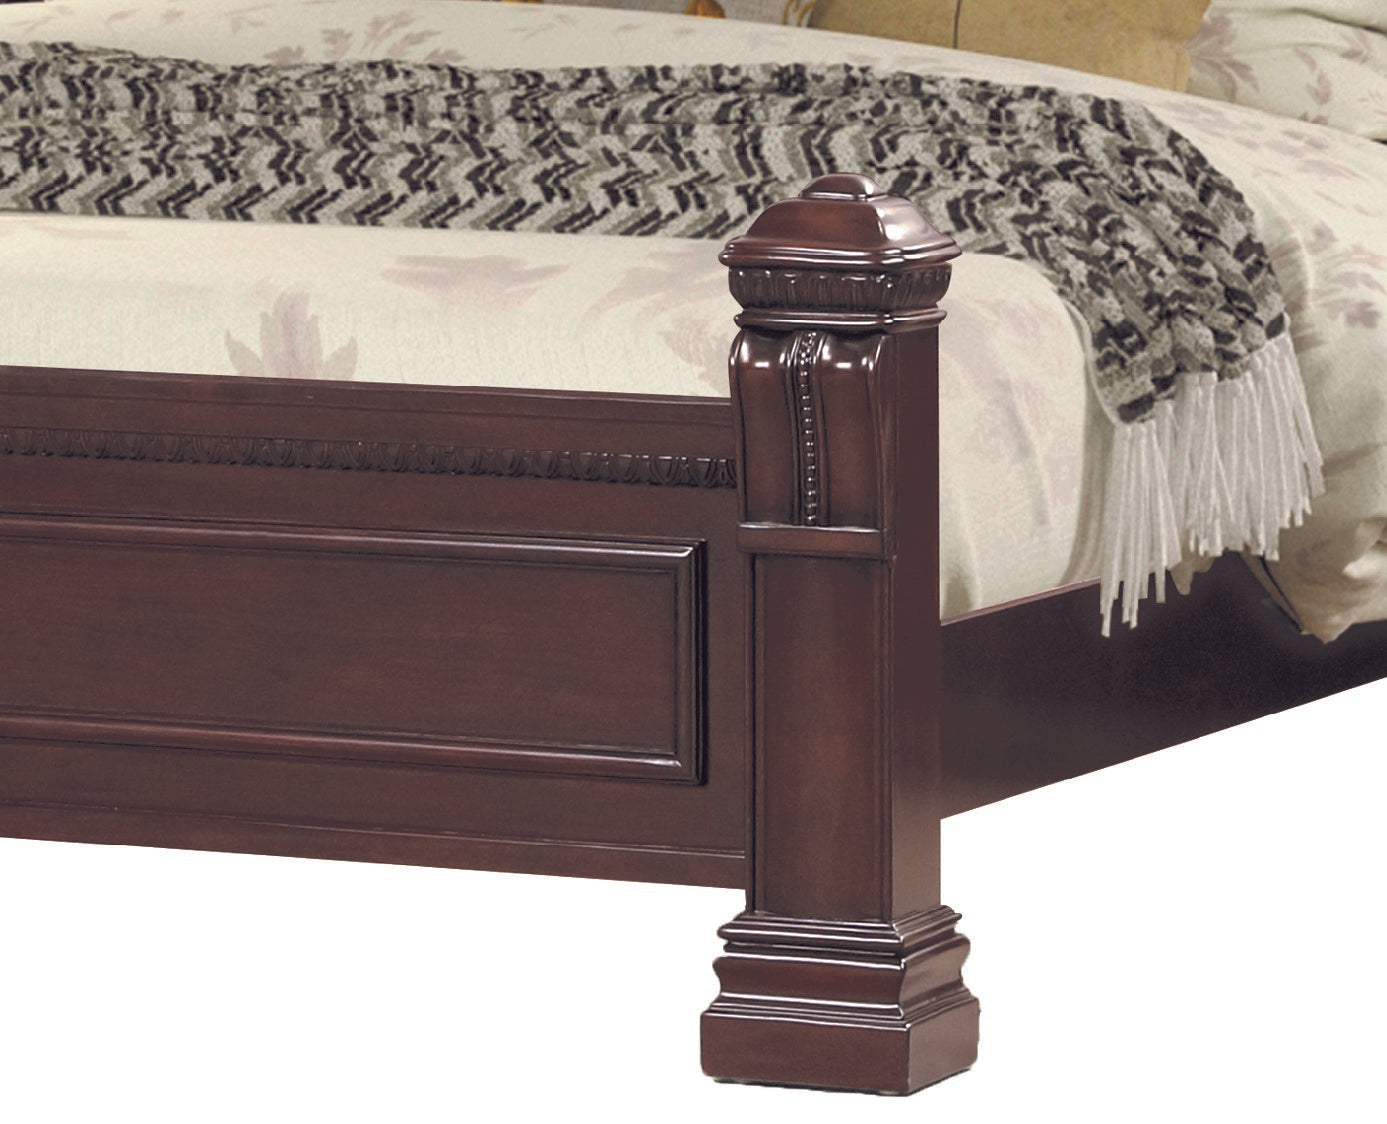 Aspen Queen Size Traditional Bed made with Wood